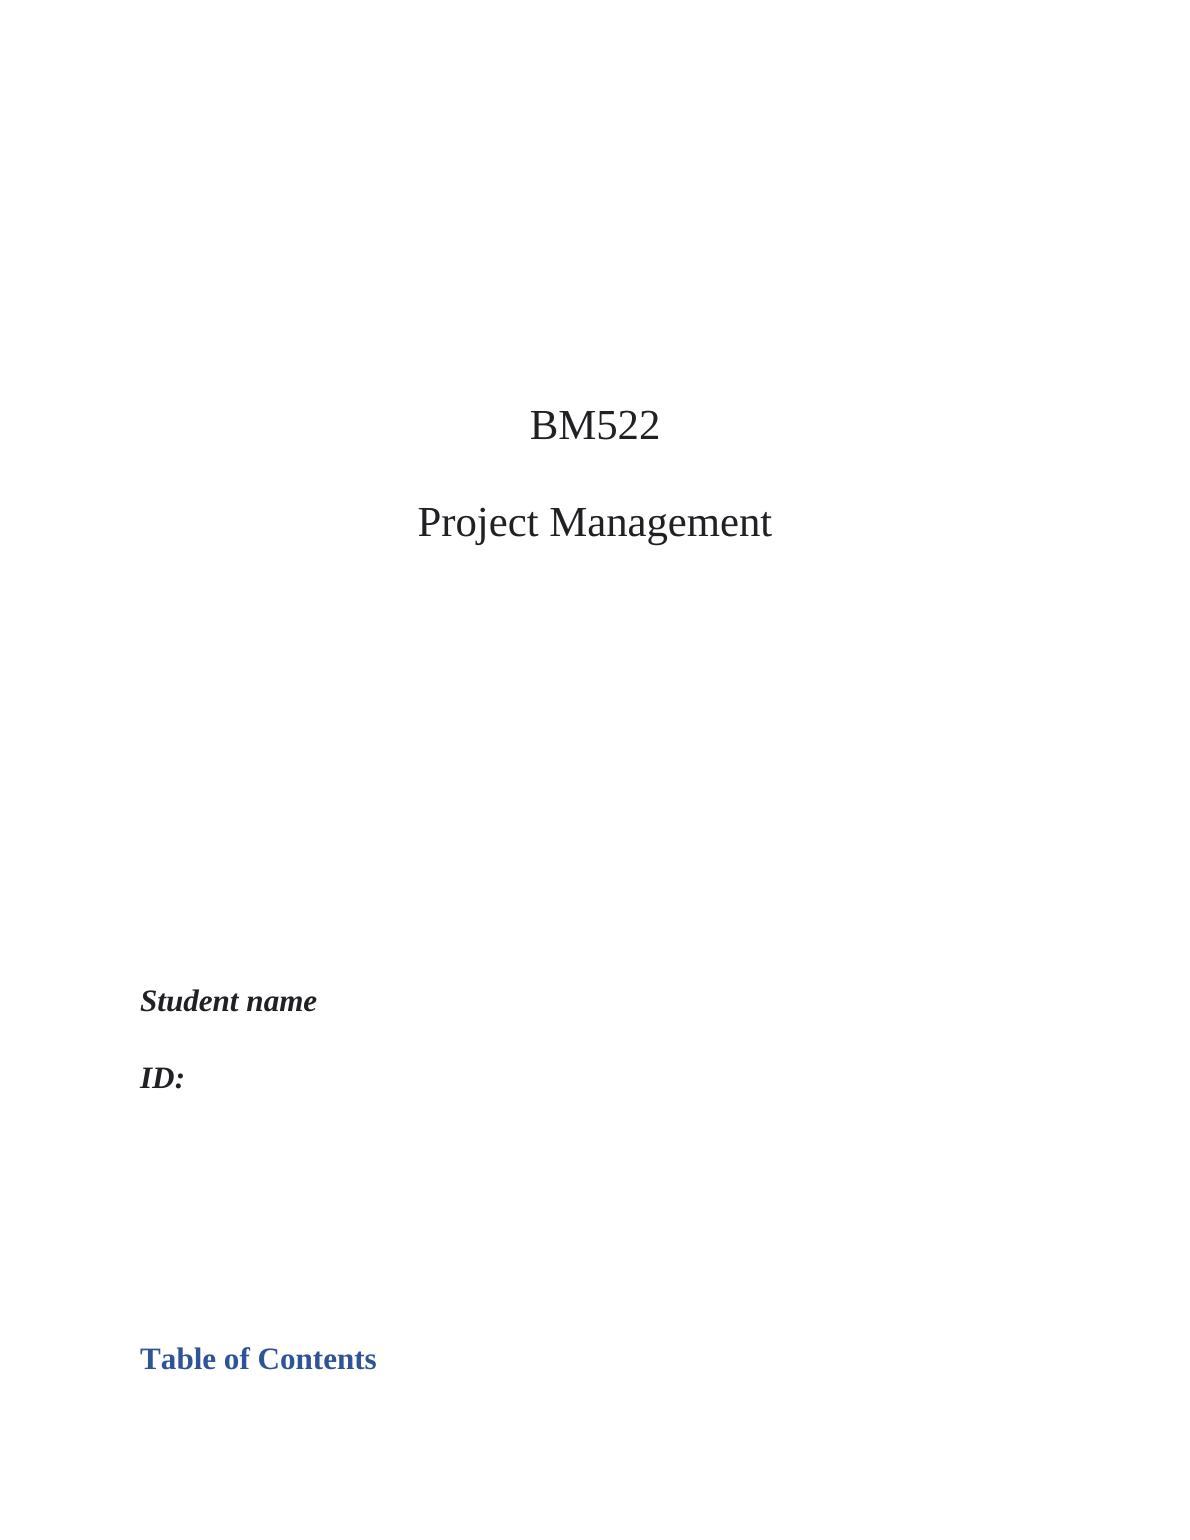 Project Management BM522 Project Management Student name ID: 3 Key methodologies and their key benefits_1